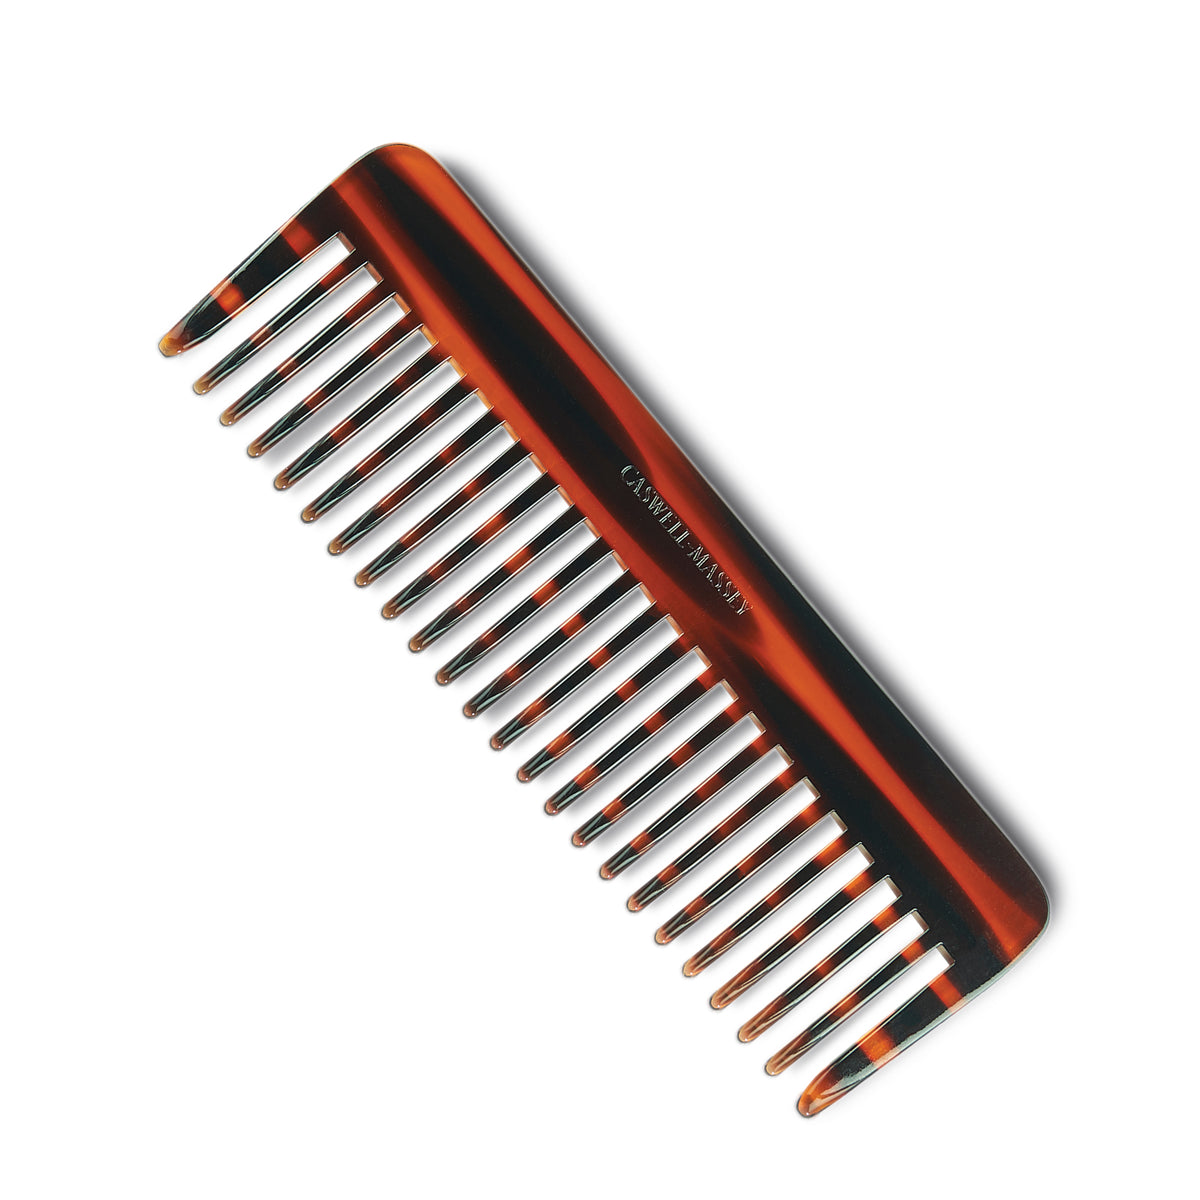 The Caswell-Massey Ultimate Hair Brush Guide